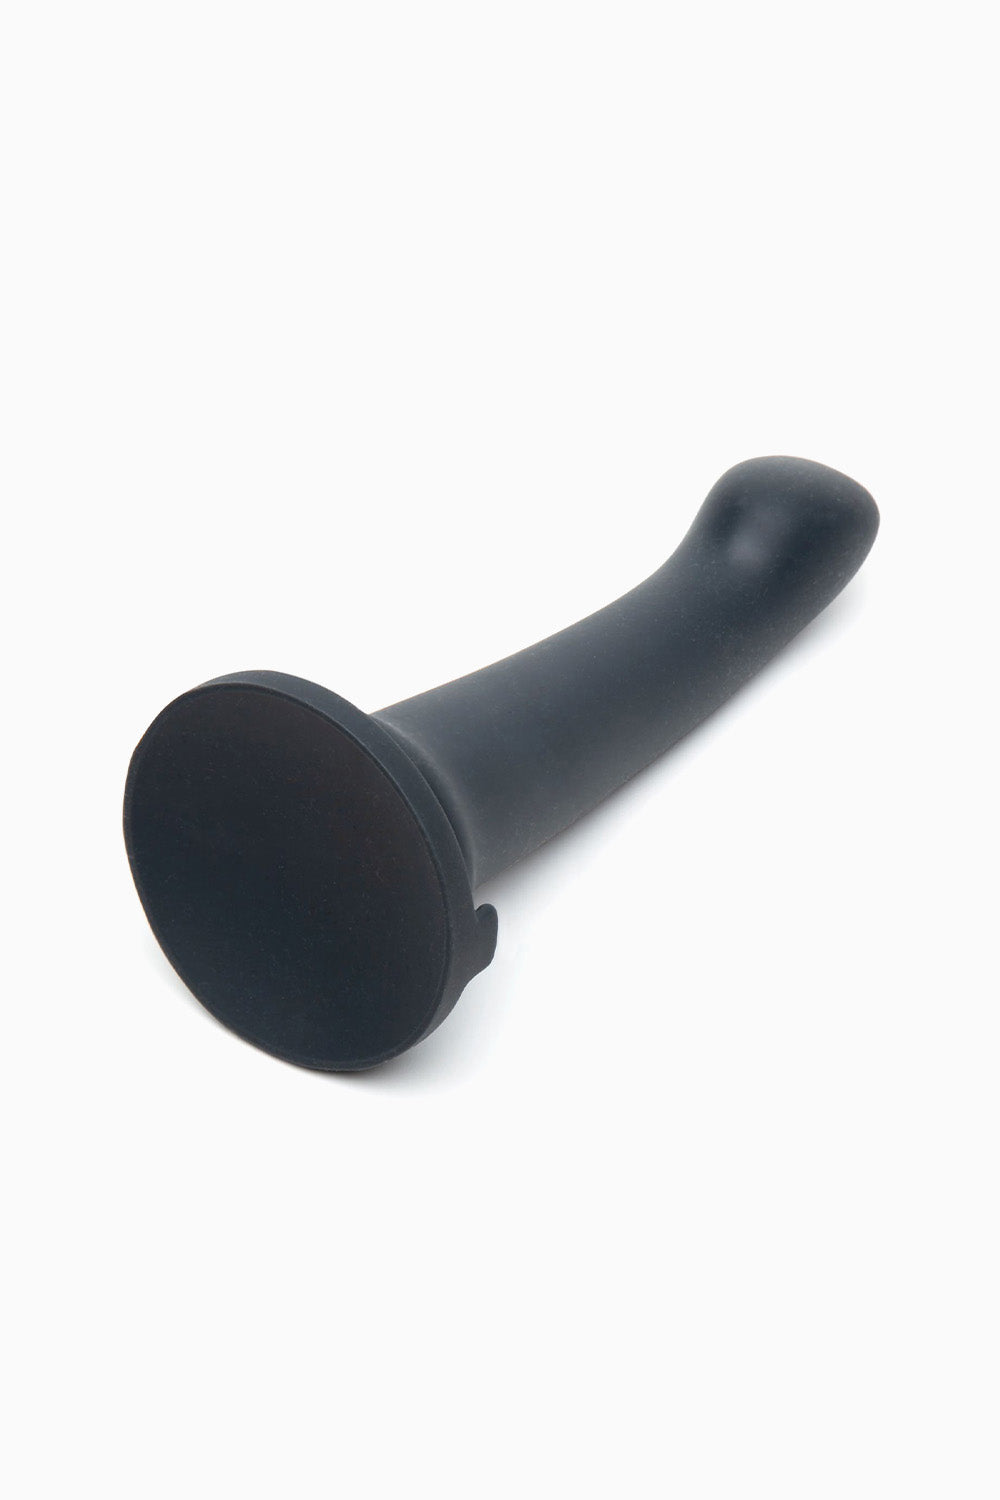 Fifty Shades of Grey Feel it Baby Silicone Dildo, 7 Inches